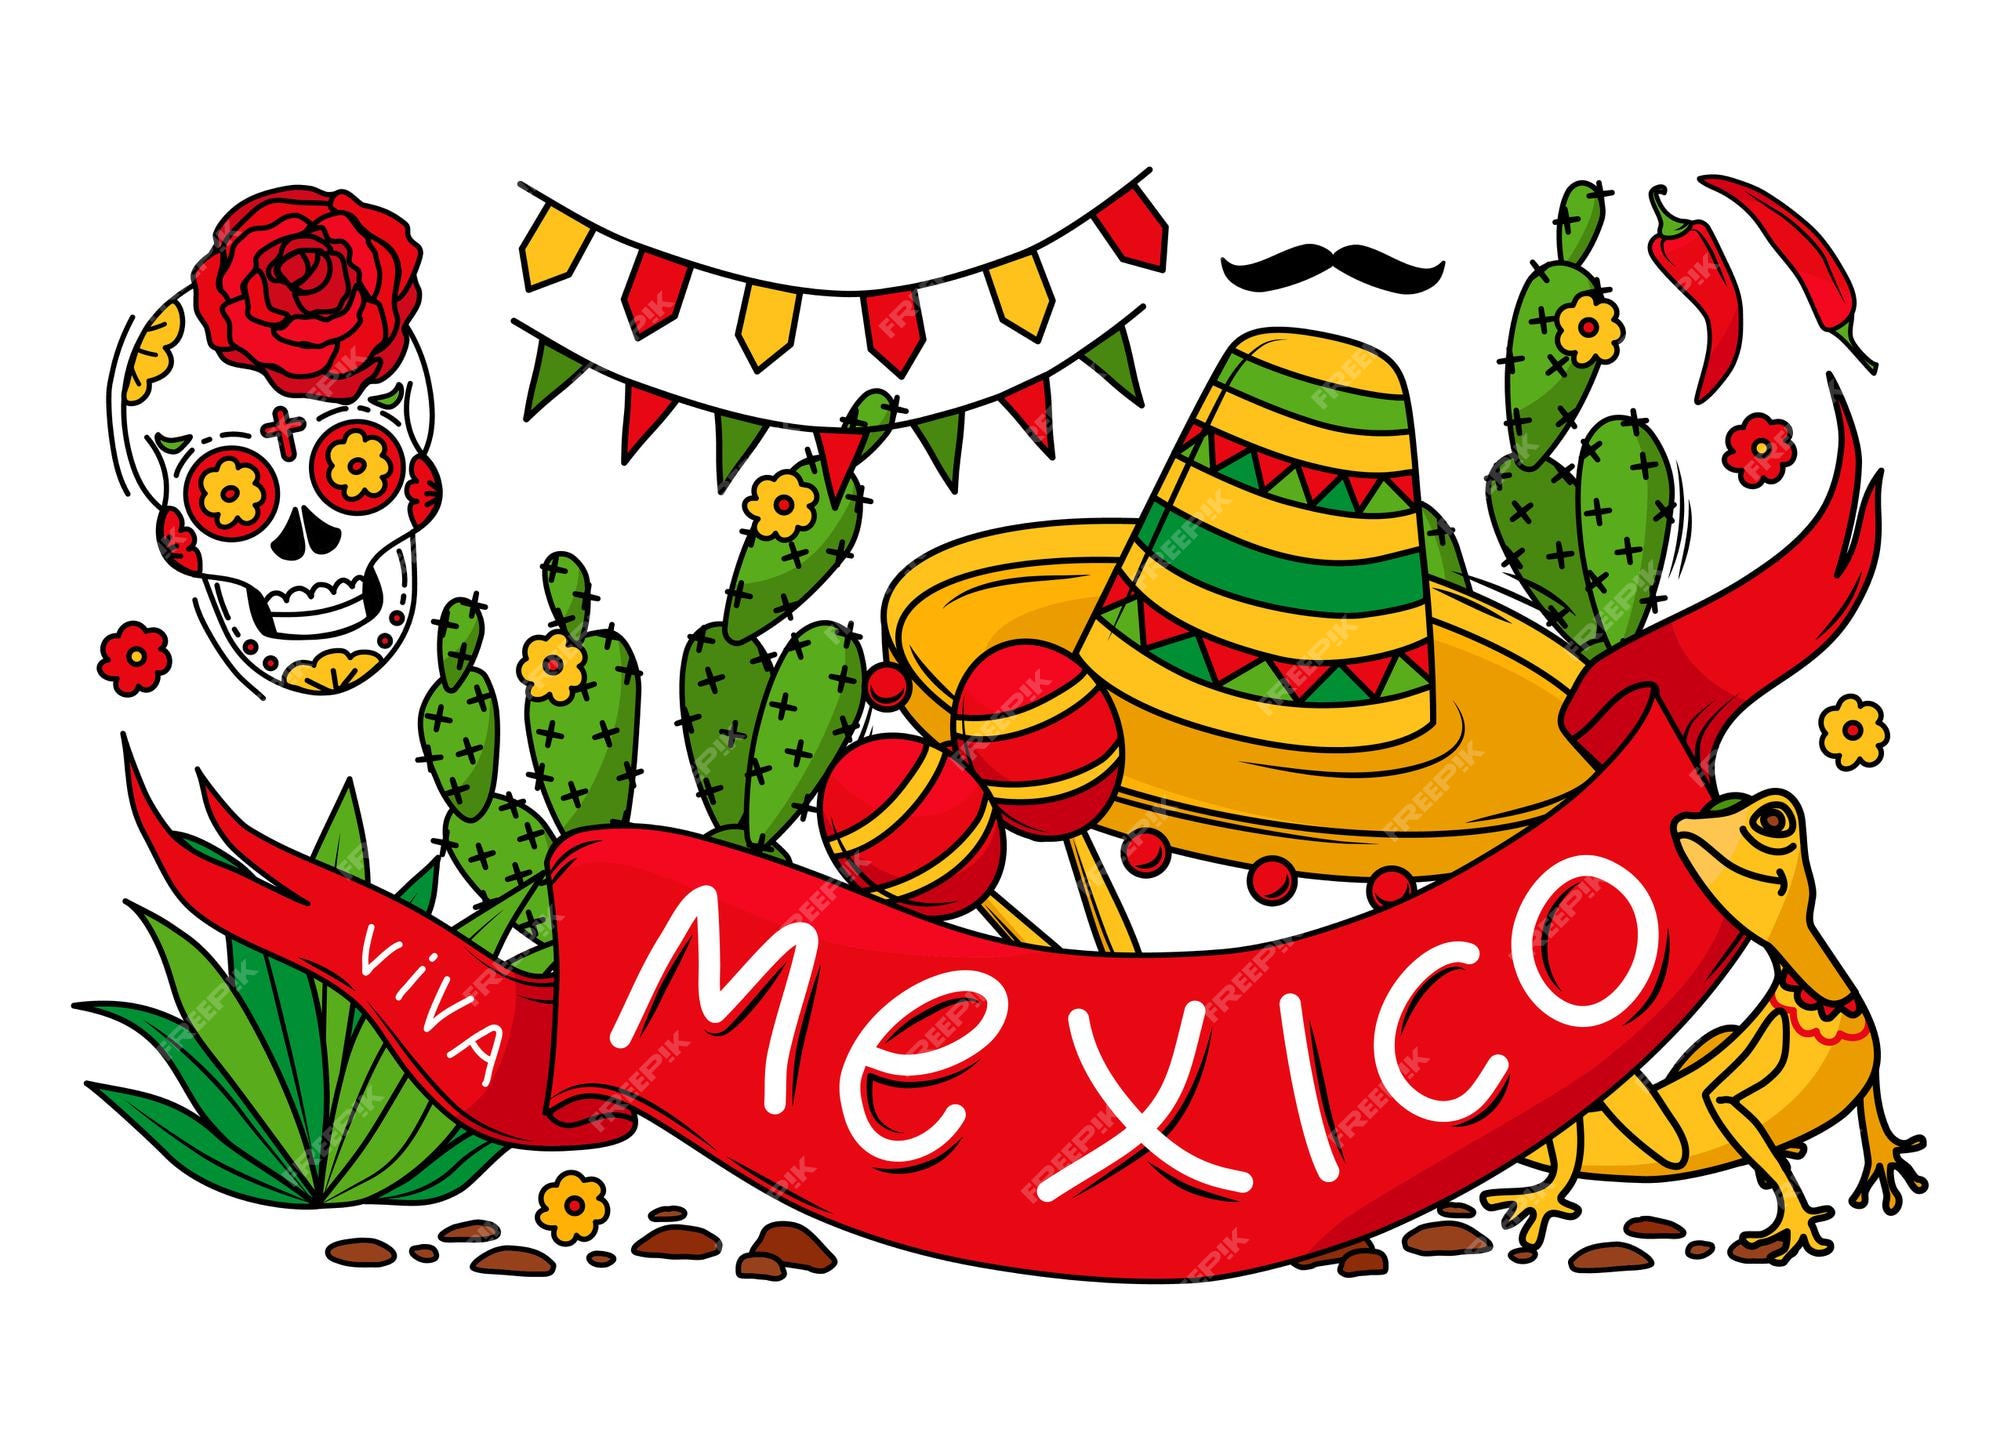 Page 20 | Viva mexican Vectors & Illustrations for Free Download | Freepik